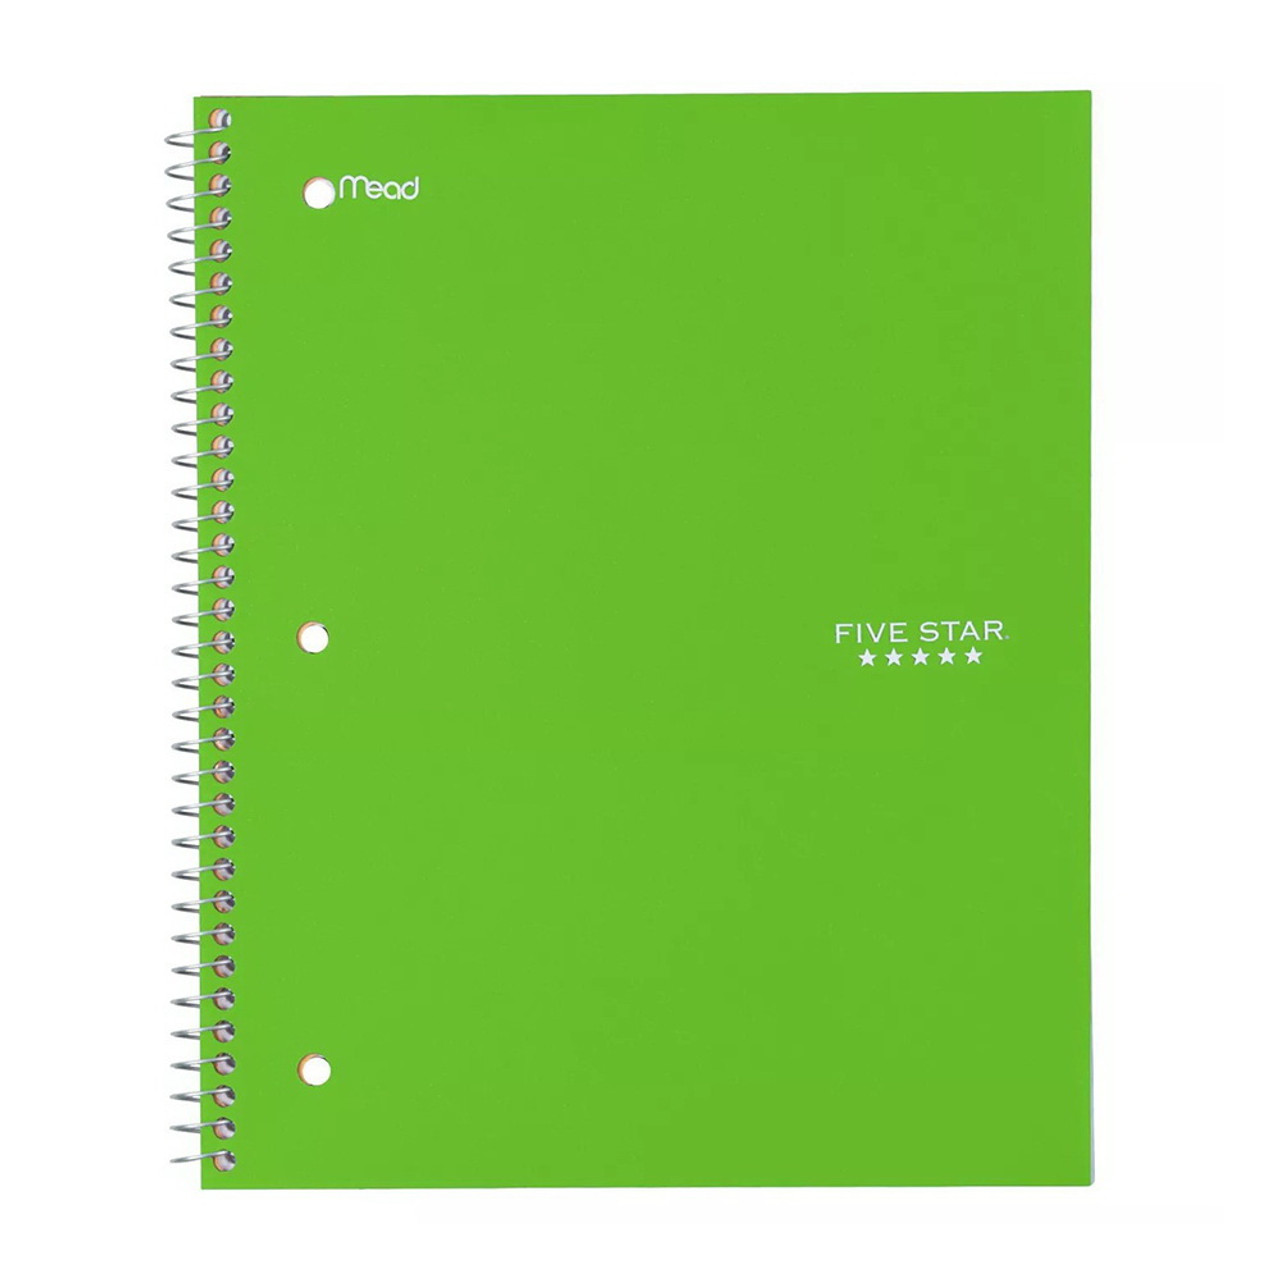 Five Star 3 Subject Wide Ruled Spiral Notebook (Colors May Vary)